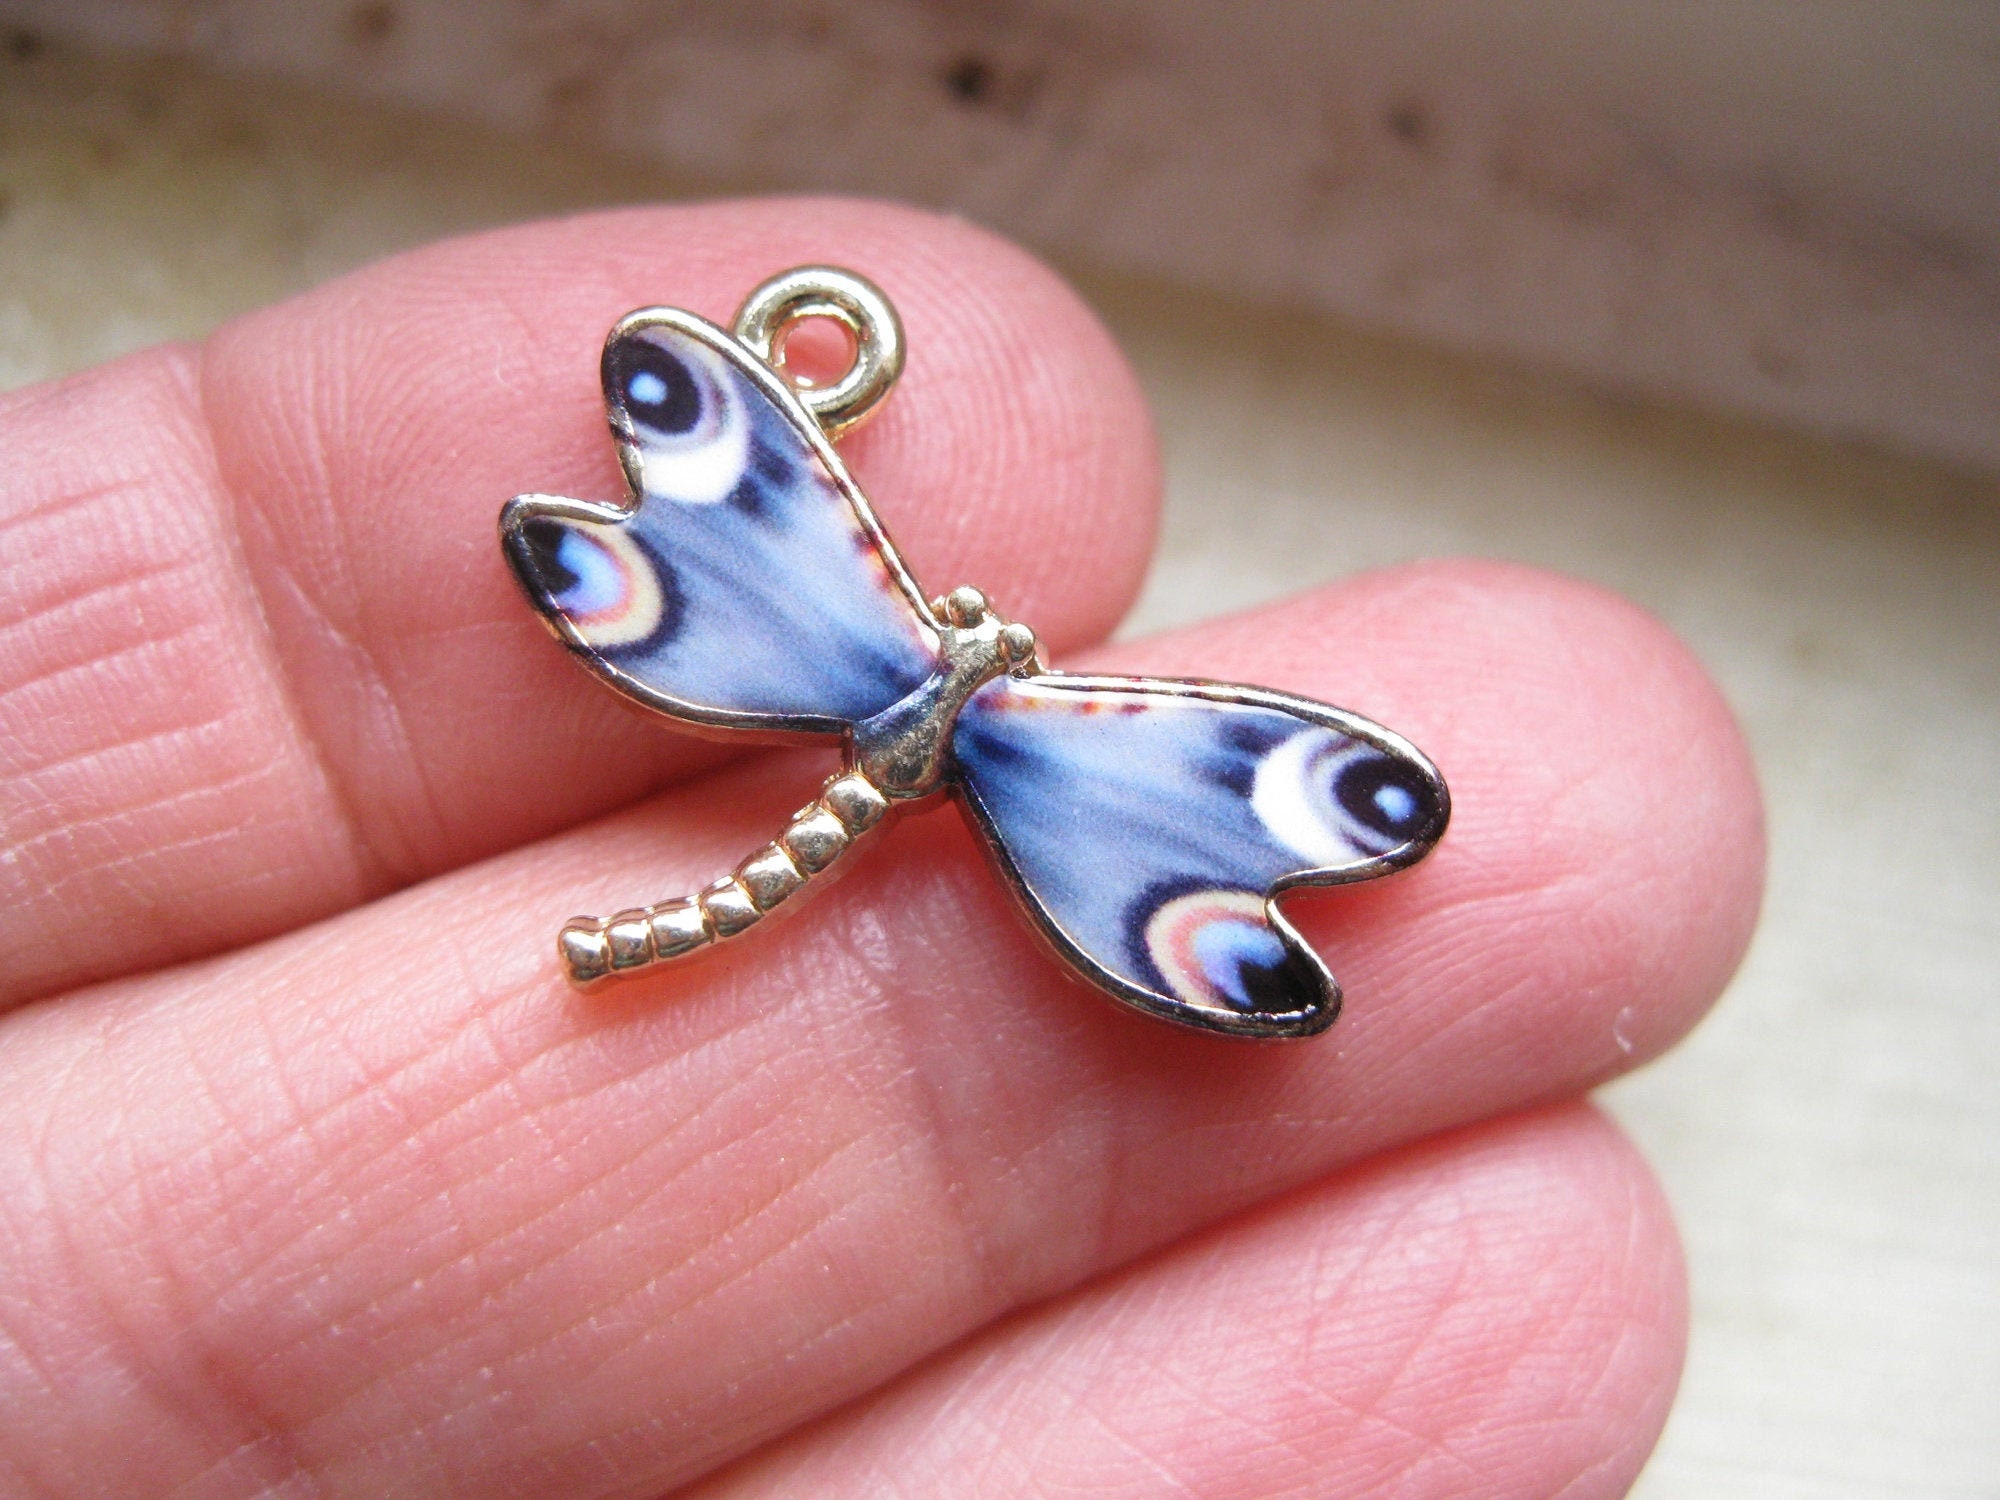 Enamel Bee Charm For DIY Jewelry Making Butterfly, Dragonfly, Bees, Frog,  Mushroom Pendants In 1 Box From Chinakelly_jewelry, $24.35